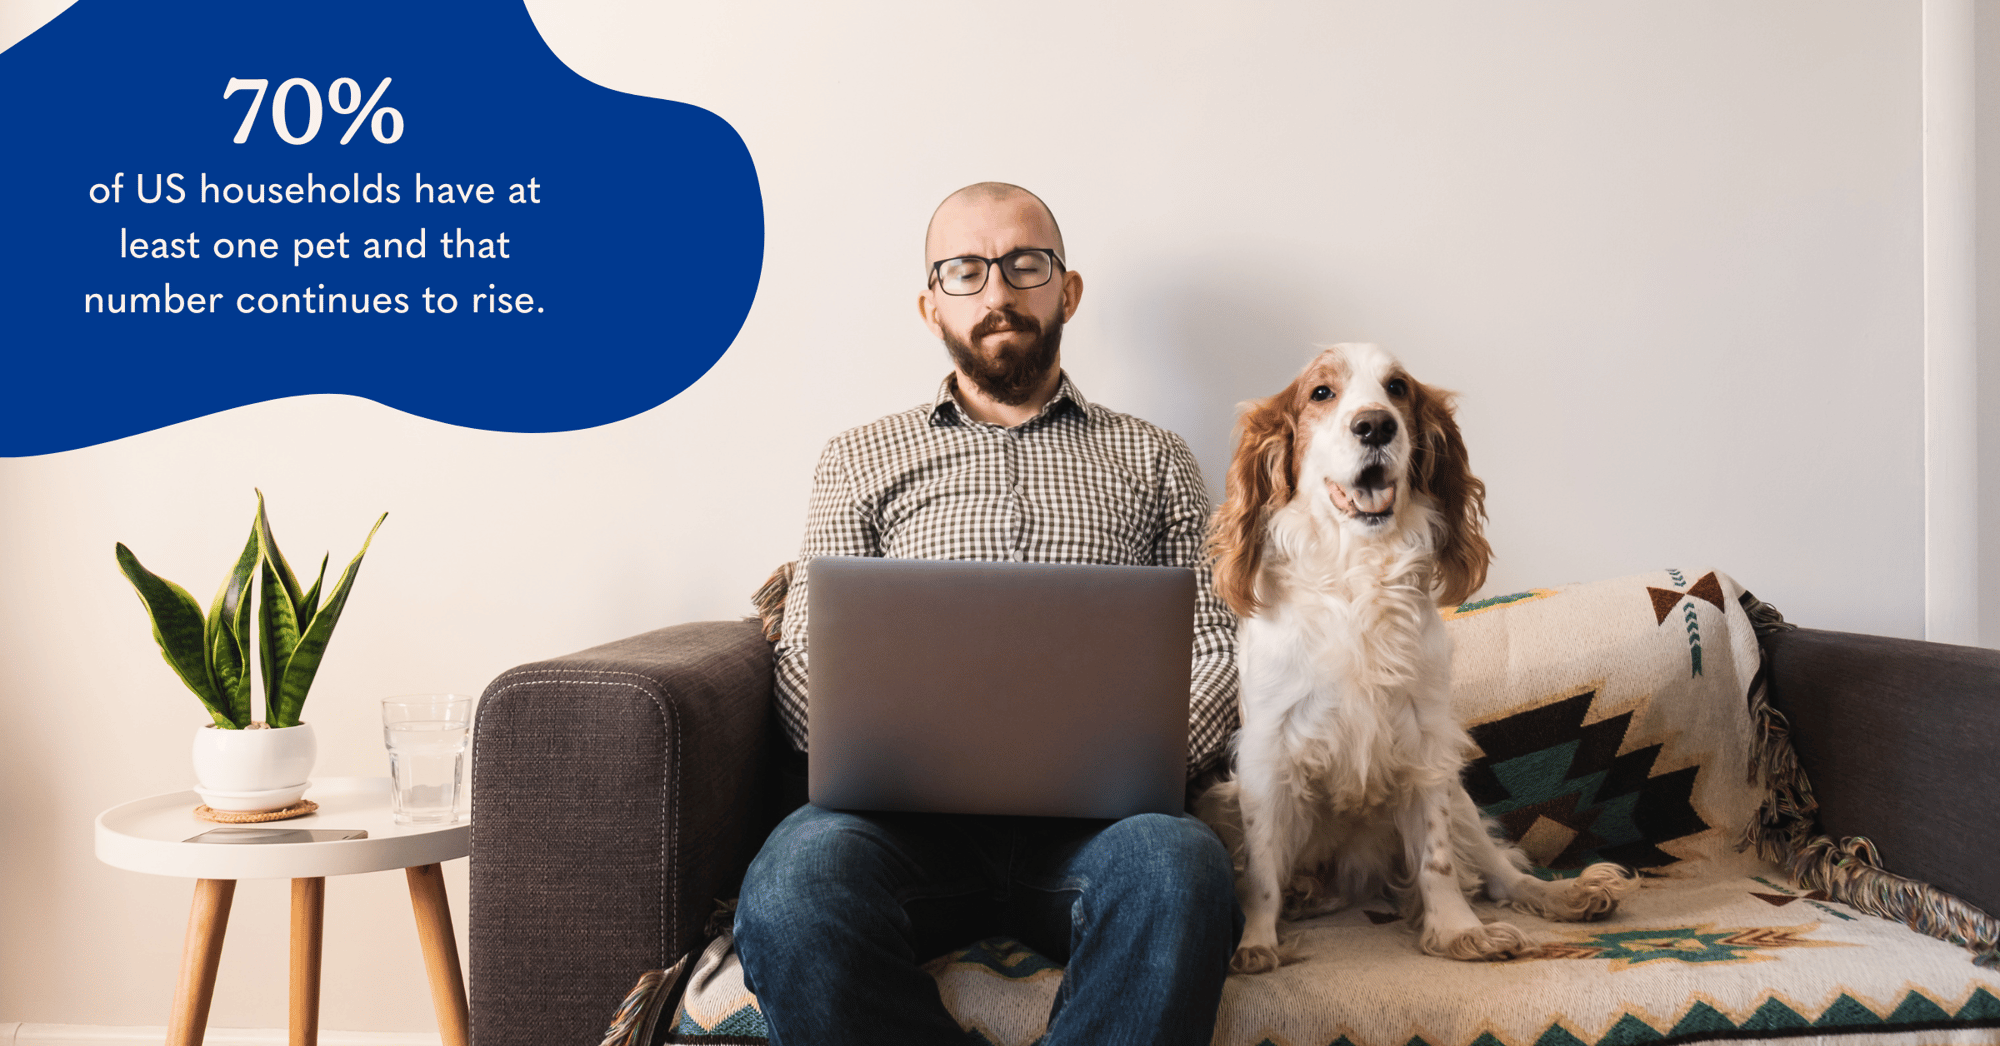 Airvet: Pet care and employee engagement